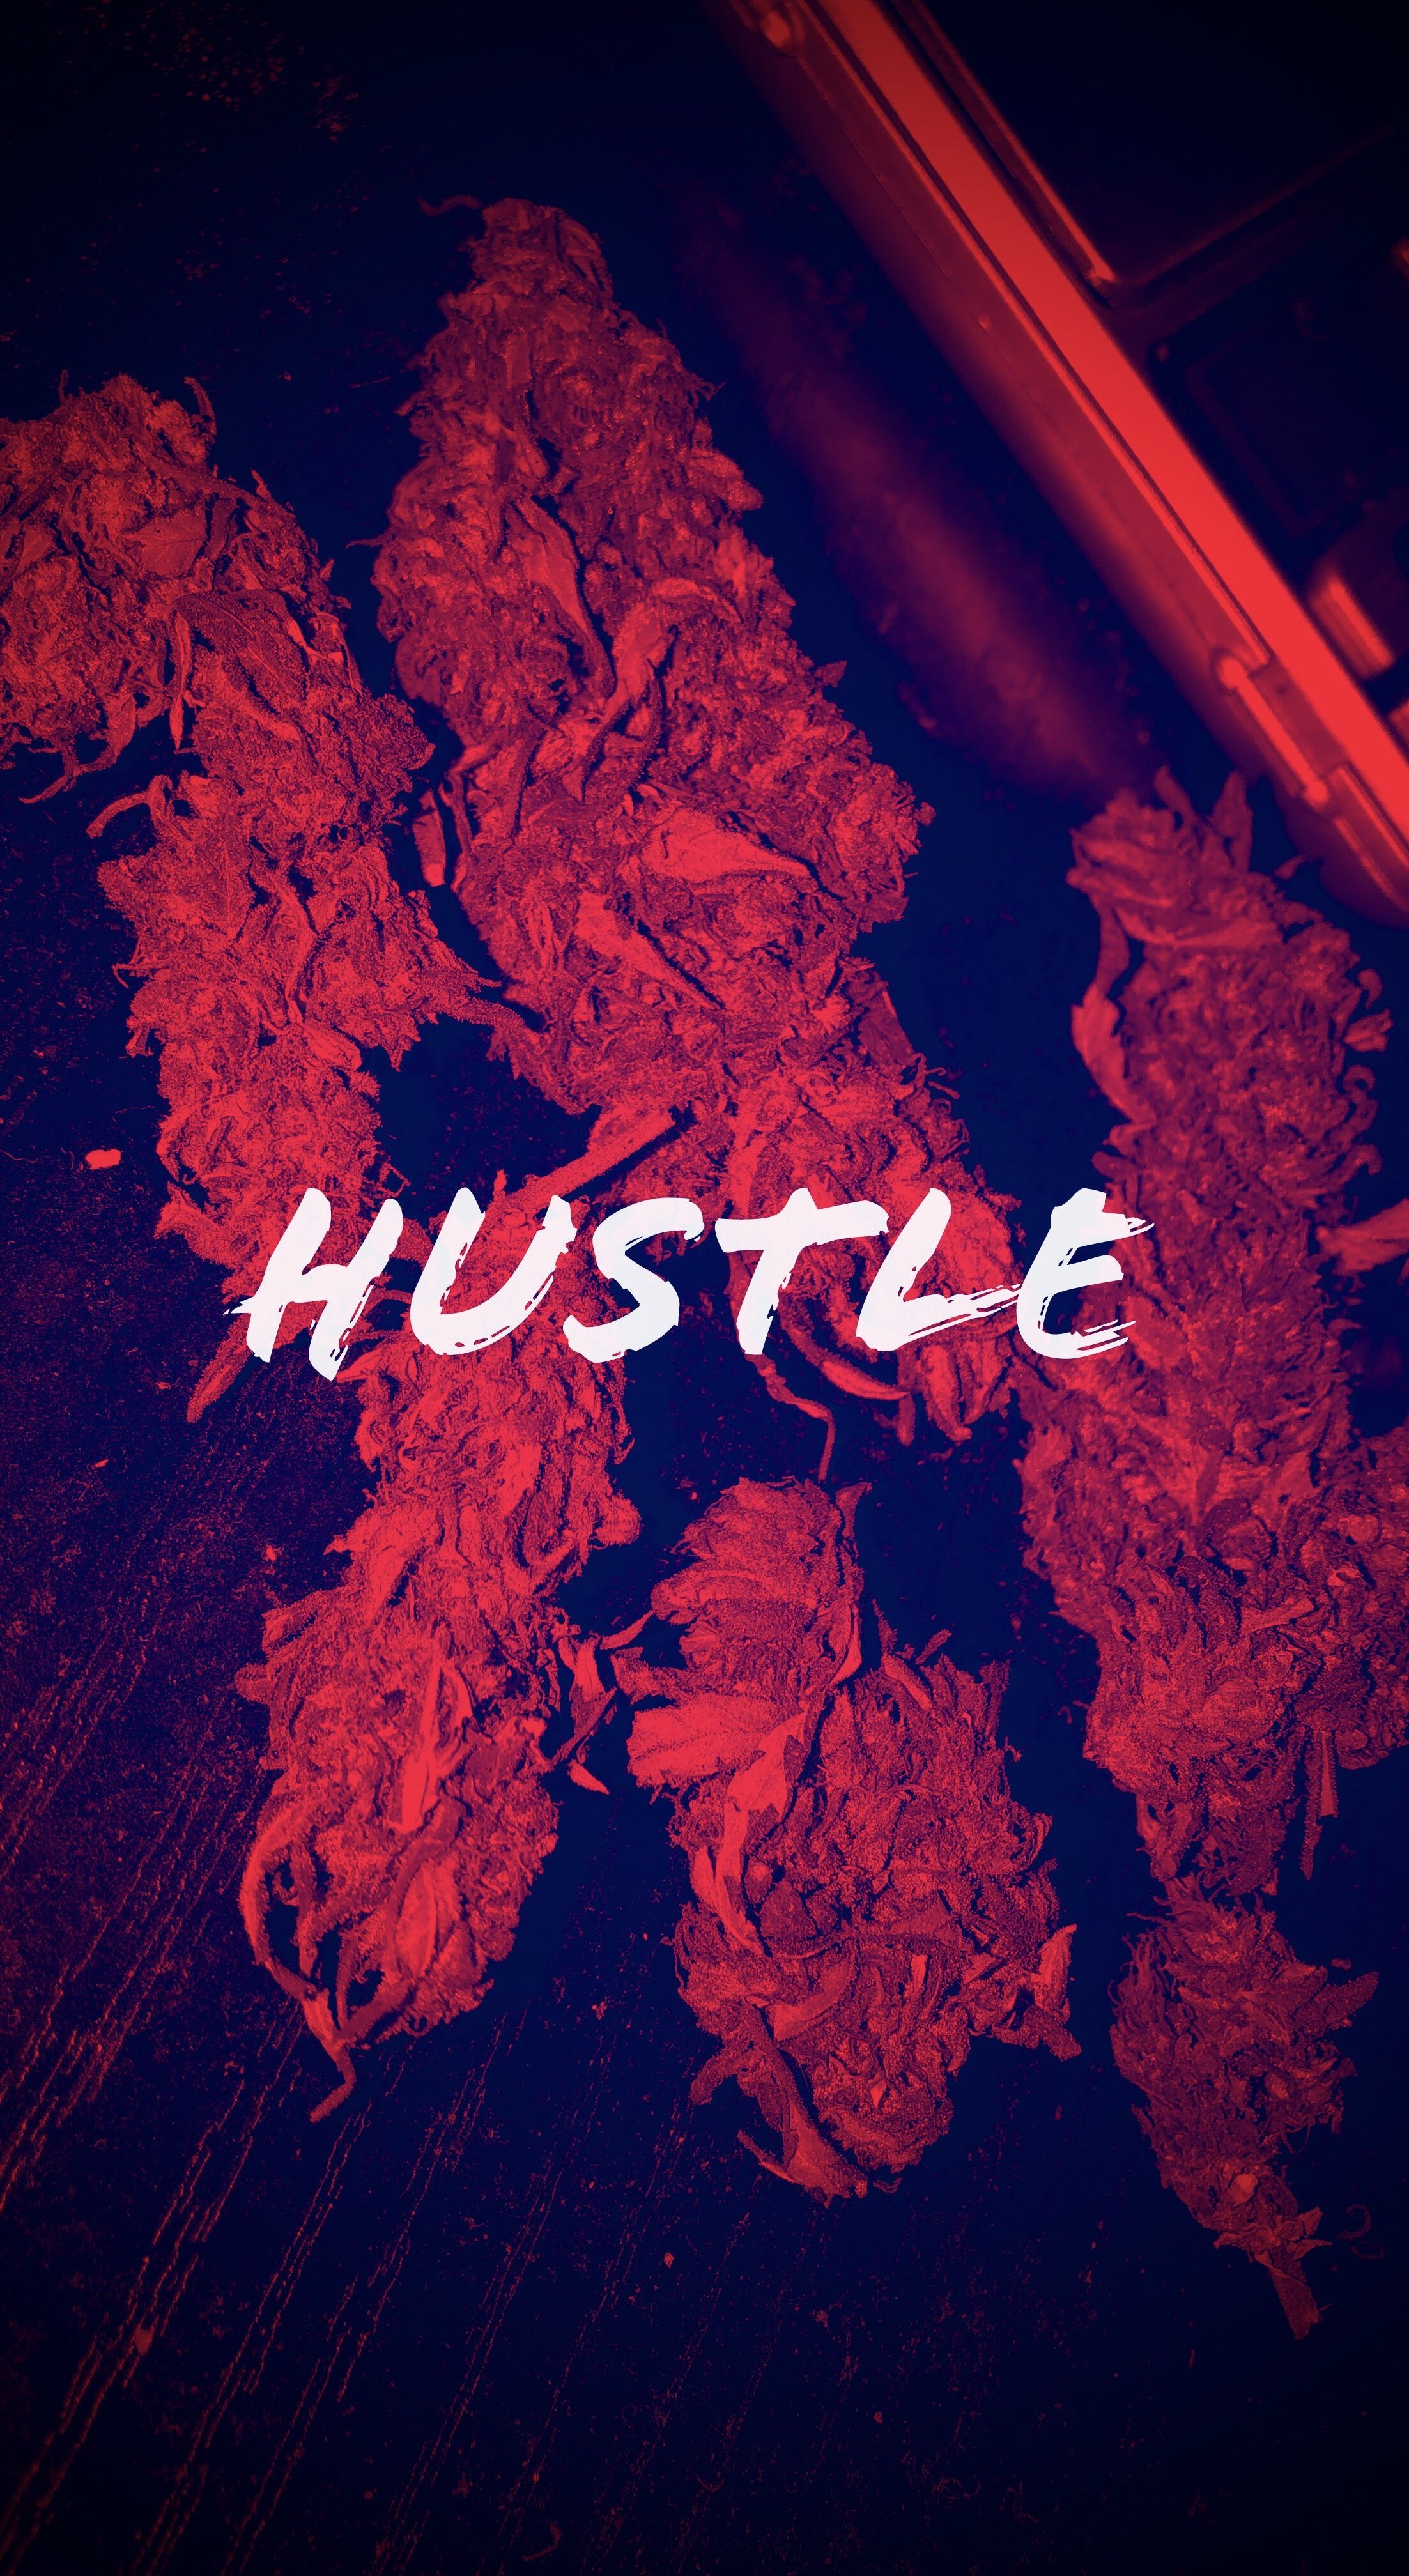 100 Hustle Quotes With Images to Inspire You to Get More Done